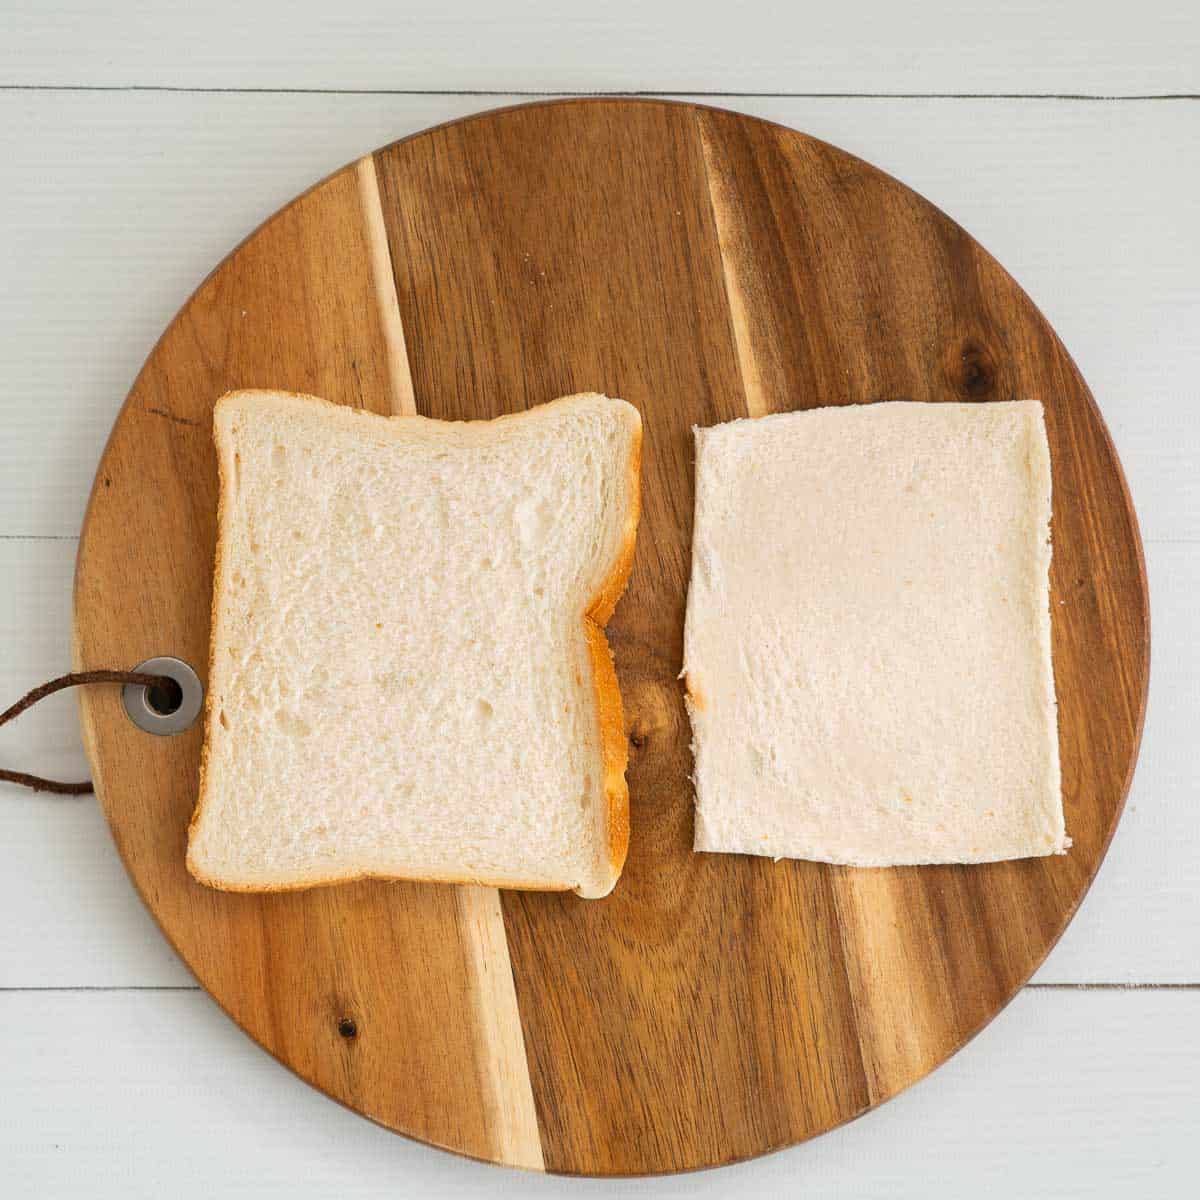 two slices of bread on a wooden chooping board, one with the slices removed